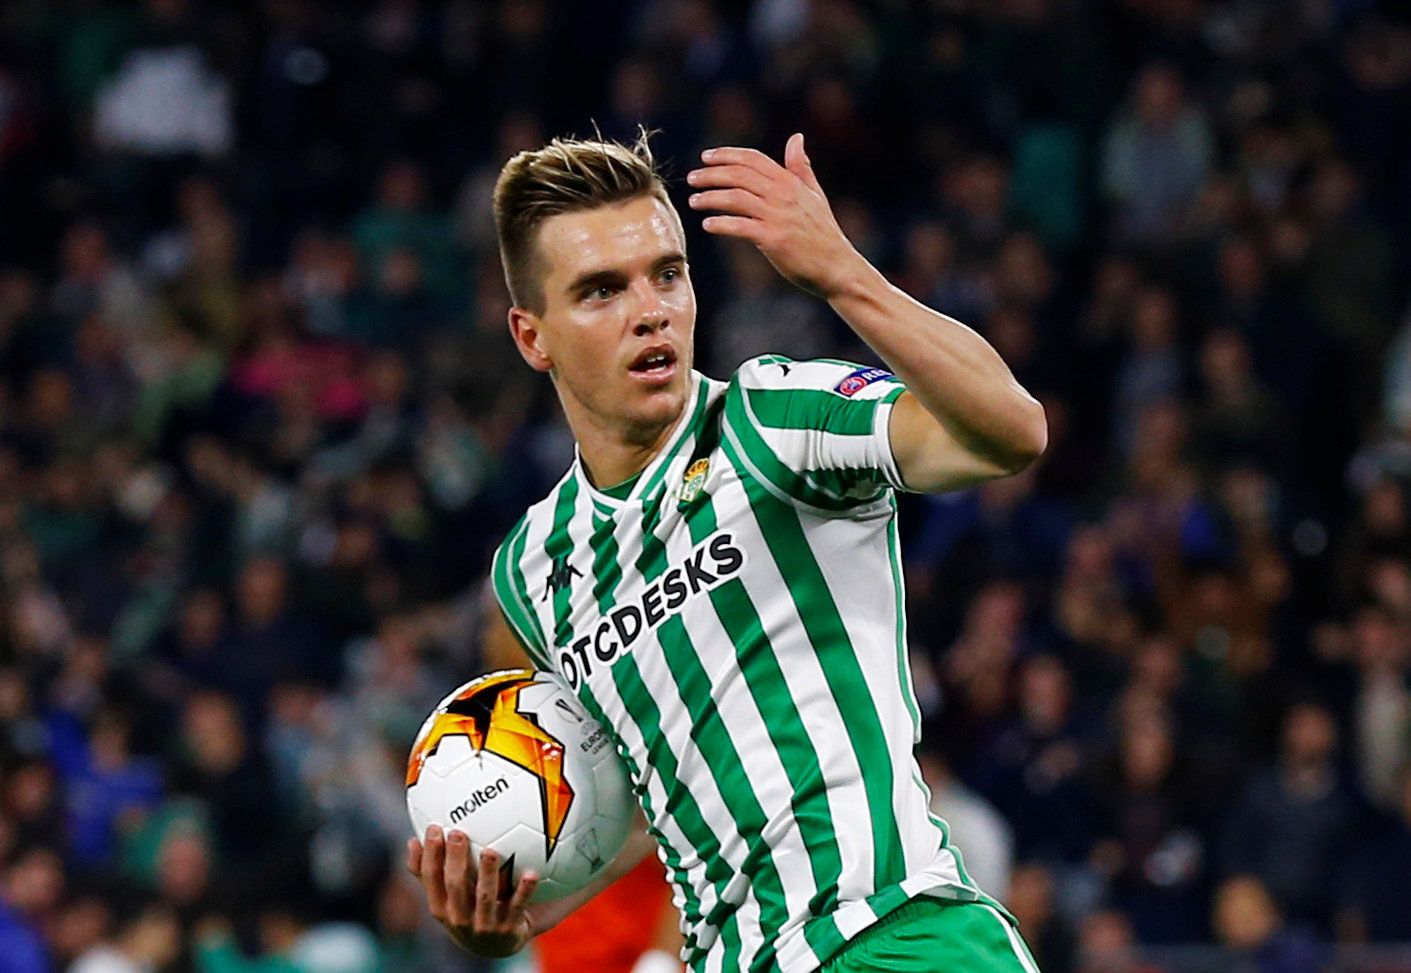 Soccer Football - Europa League - Round of 32 Second Leg - Real Betis v Stade Rennes - Estadio Benito Villamarin, Seville, Spain - February 21, 2019  Real Betis' Giovani Lo Celso celebrates scoring their first goal    REUTERS/Marcelo Del Pozo